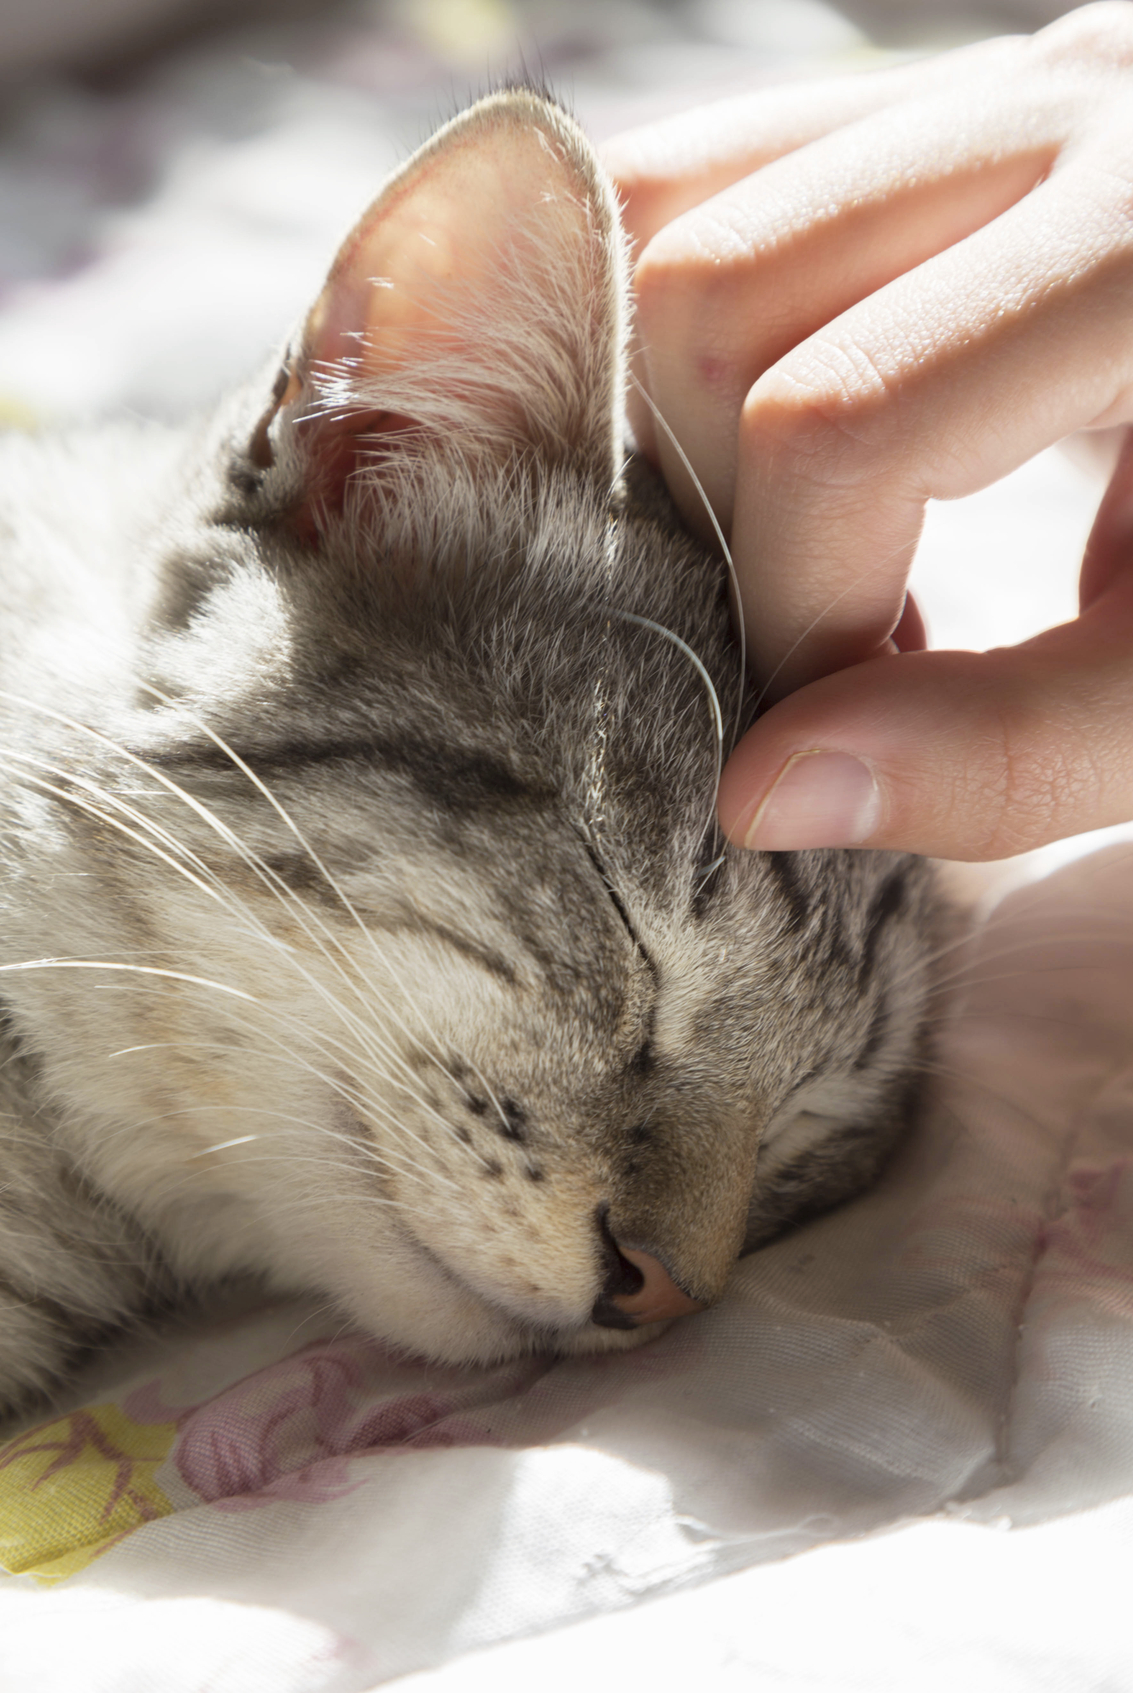 Radioiodine Therapy Centers for the Treatment of Feline Hyperthyroidism